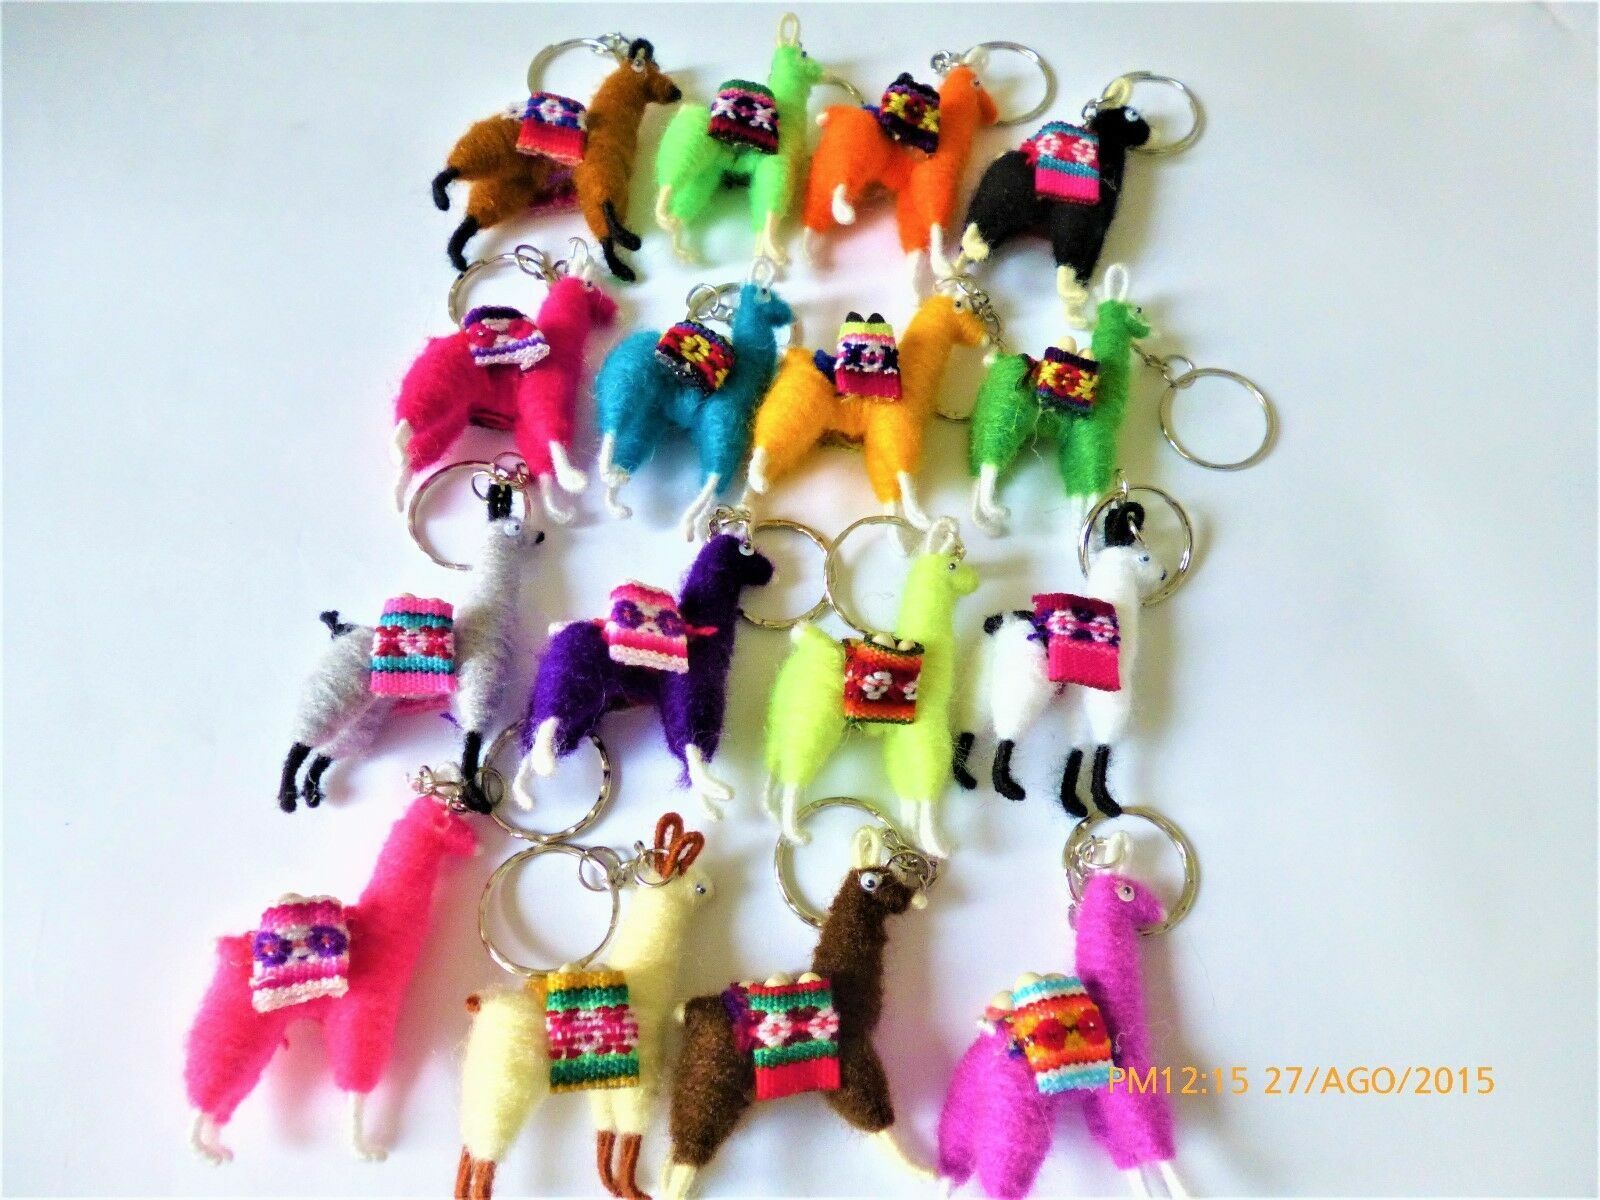 WHOLESALE LOT 100 LLAMAS KEY CHAINS RINGS   FROM  PERU ITEM IN USA